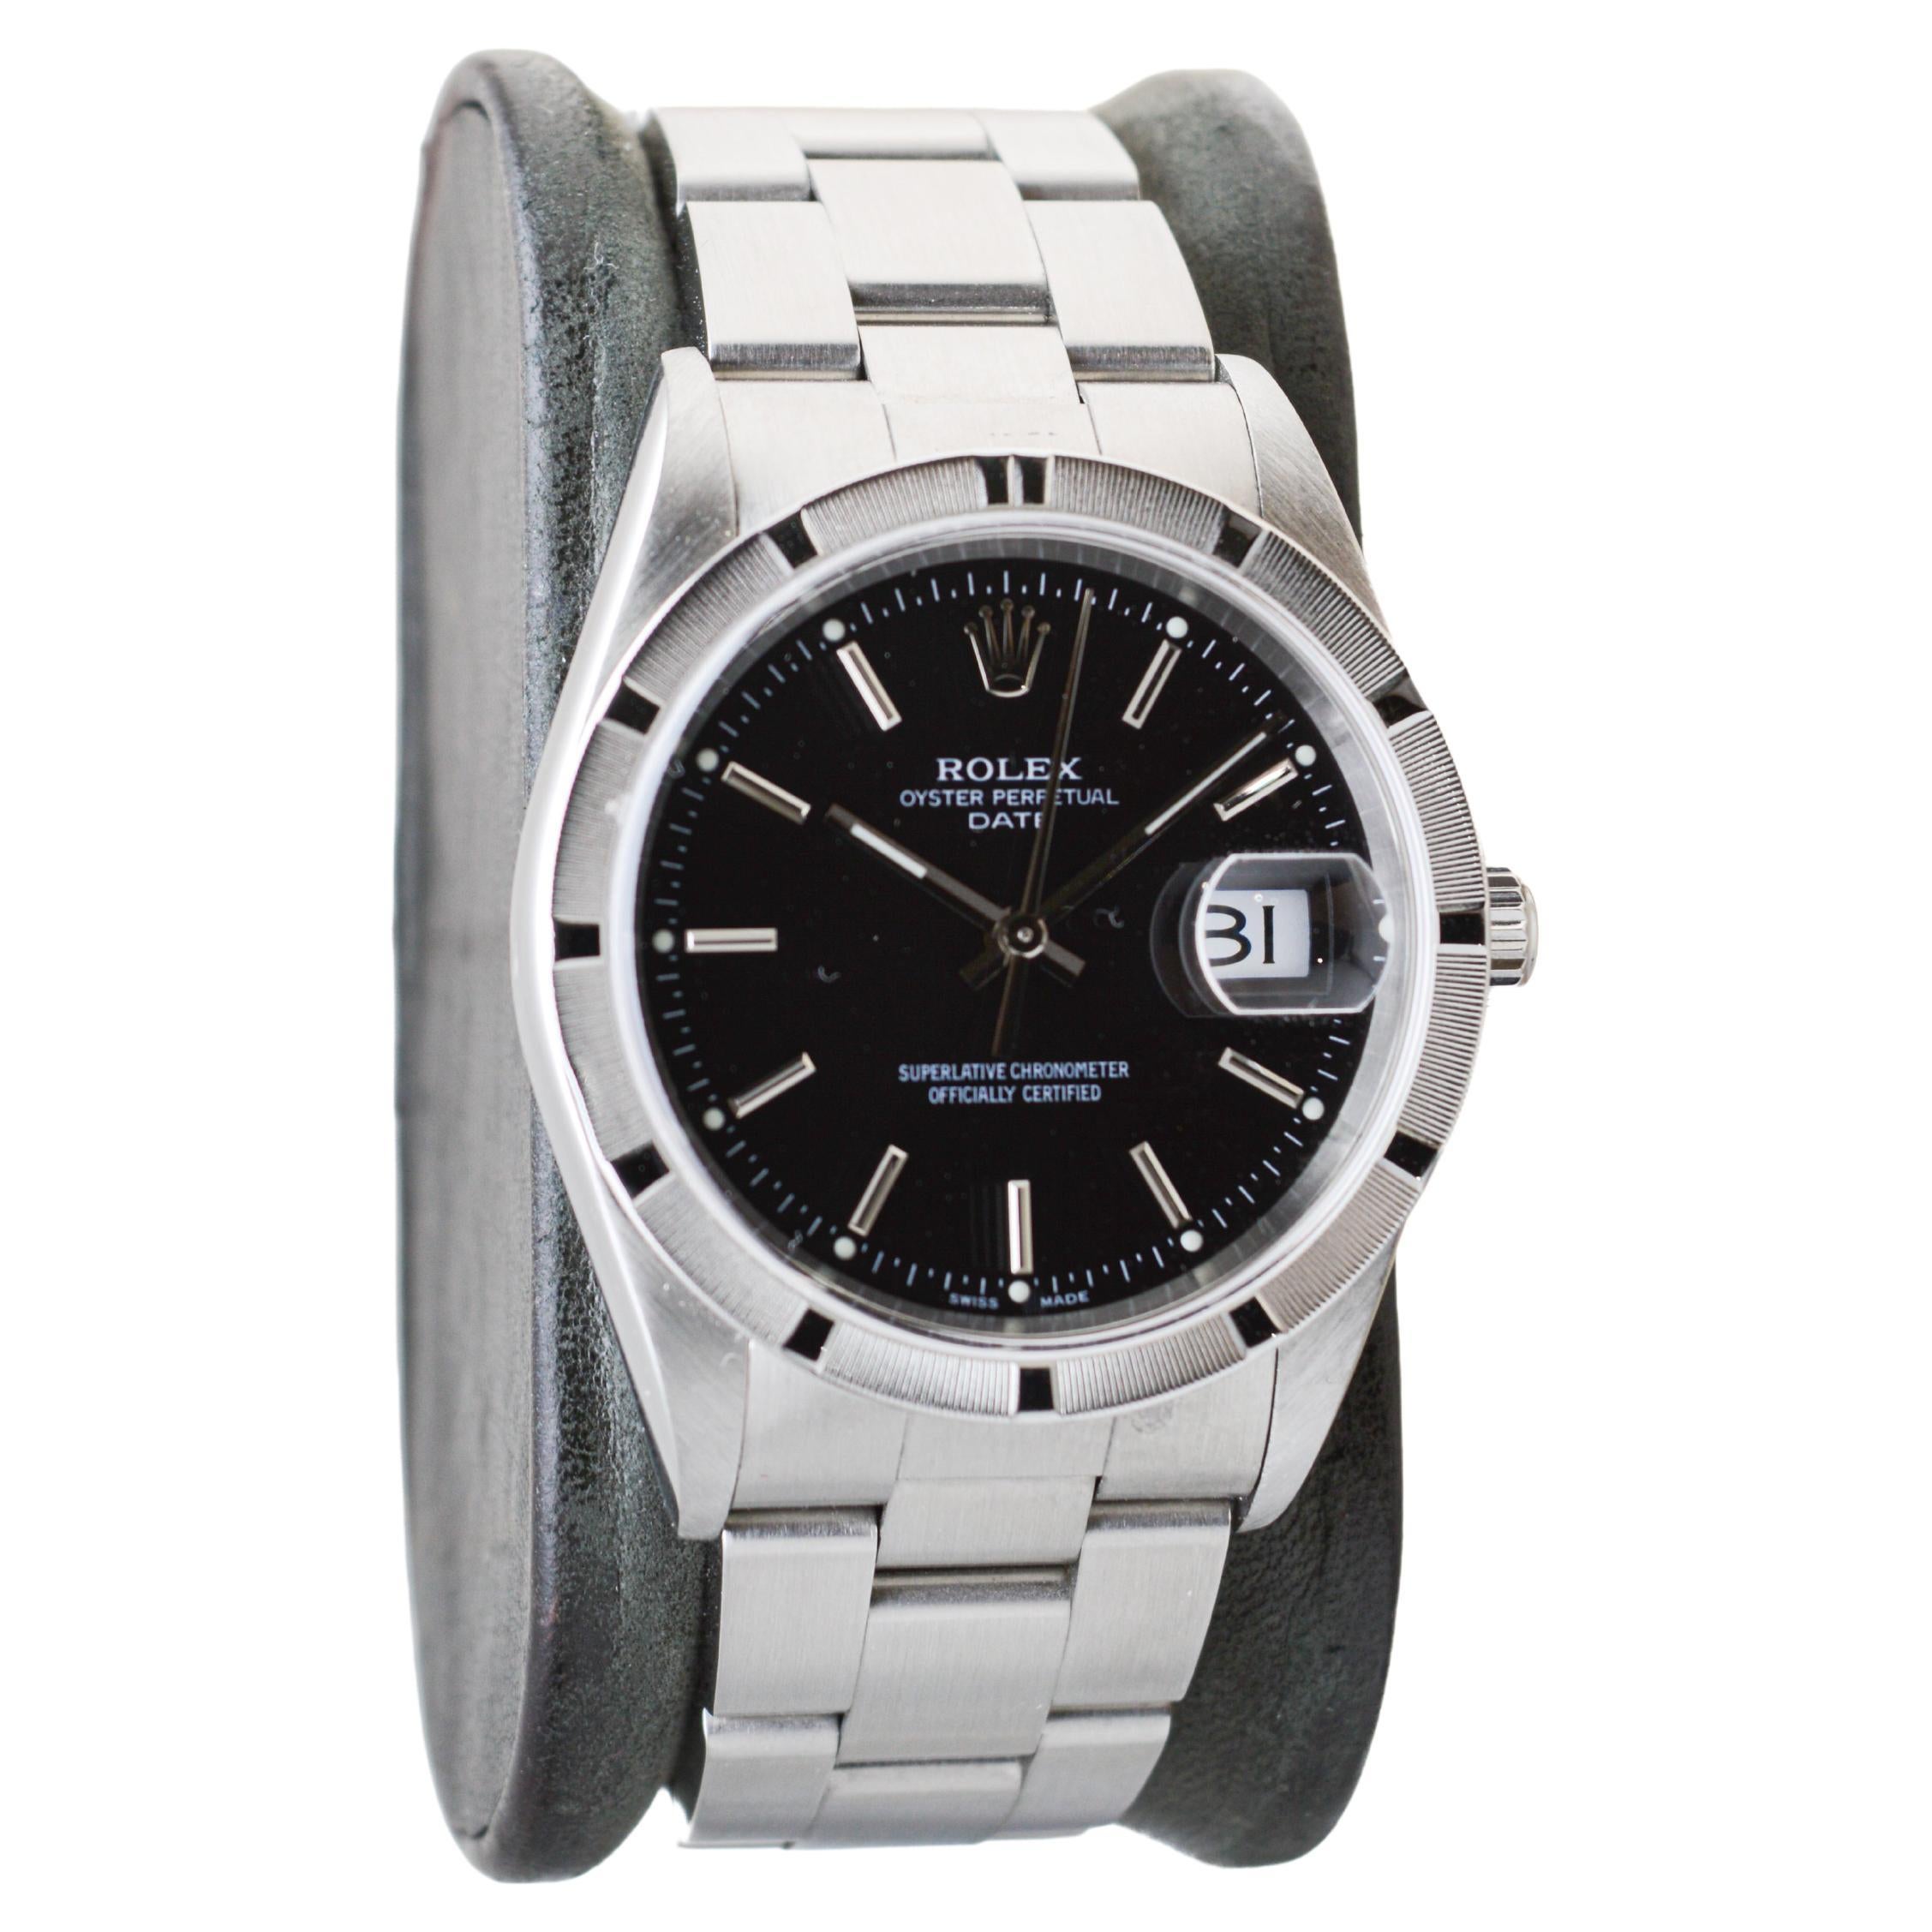 FACTORY / HOUSE: Rolex Watch Company
STYLE / REFERENCE: Oyster Perpetual Date / Reference 2120
METAL / MATERIAL: Stainless Steel
CIRCA / YEAR: 2002
DIMENSIONS / SIZE: Length X Diameter
MOVEMENT / CALIBER: Perpetual Winding / 31 Jewels / Caliber